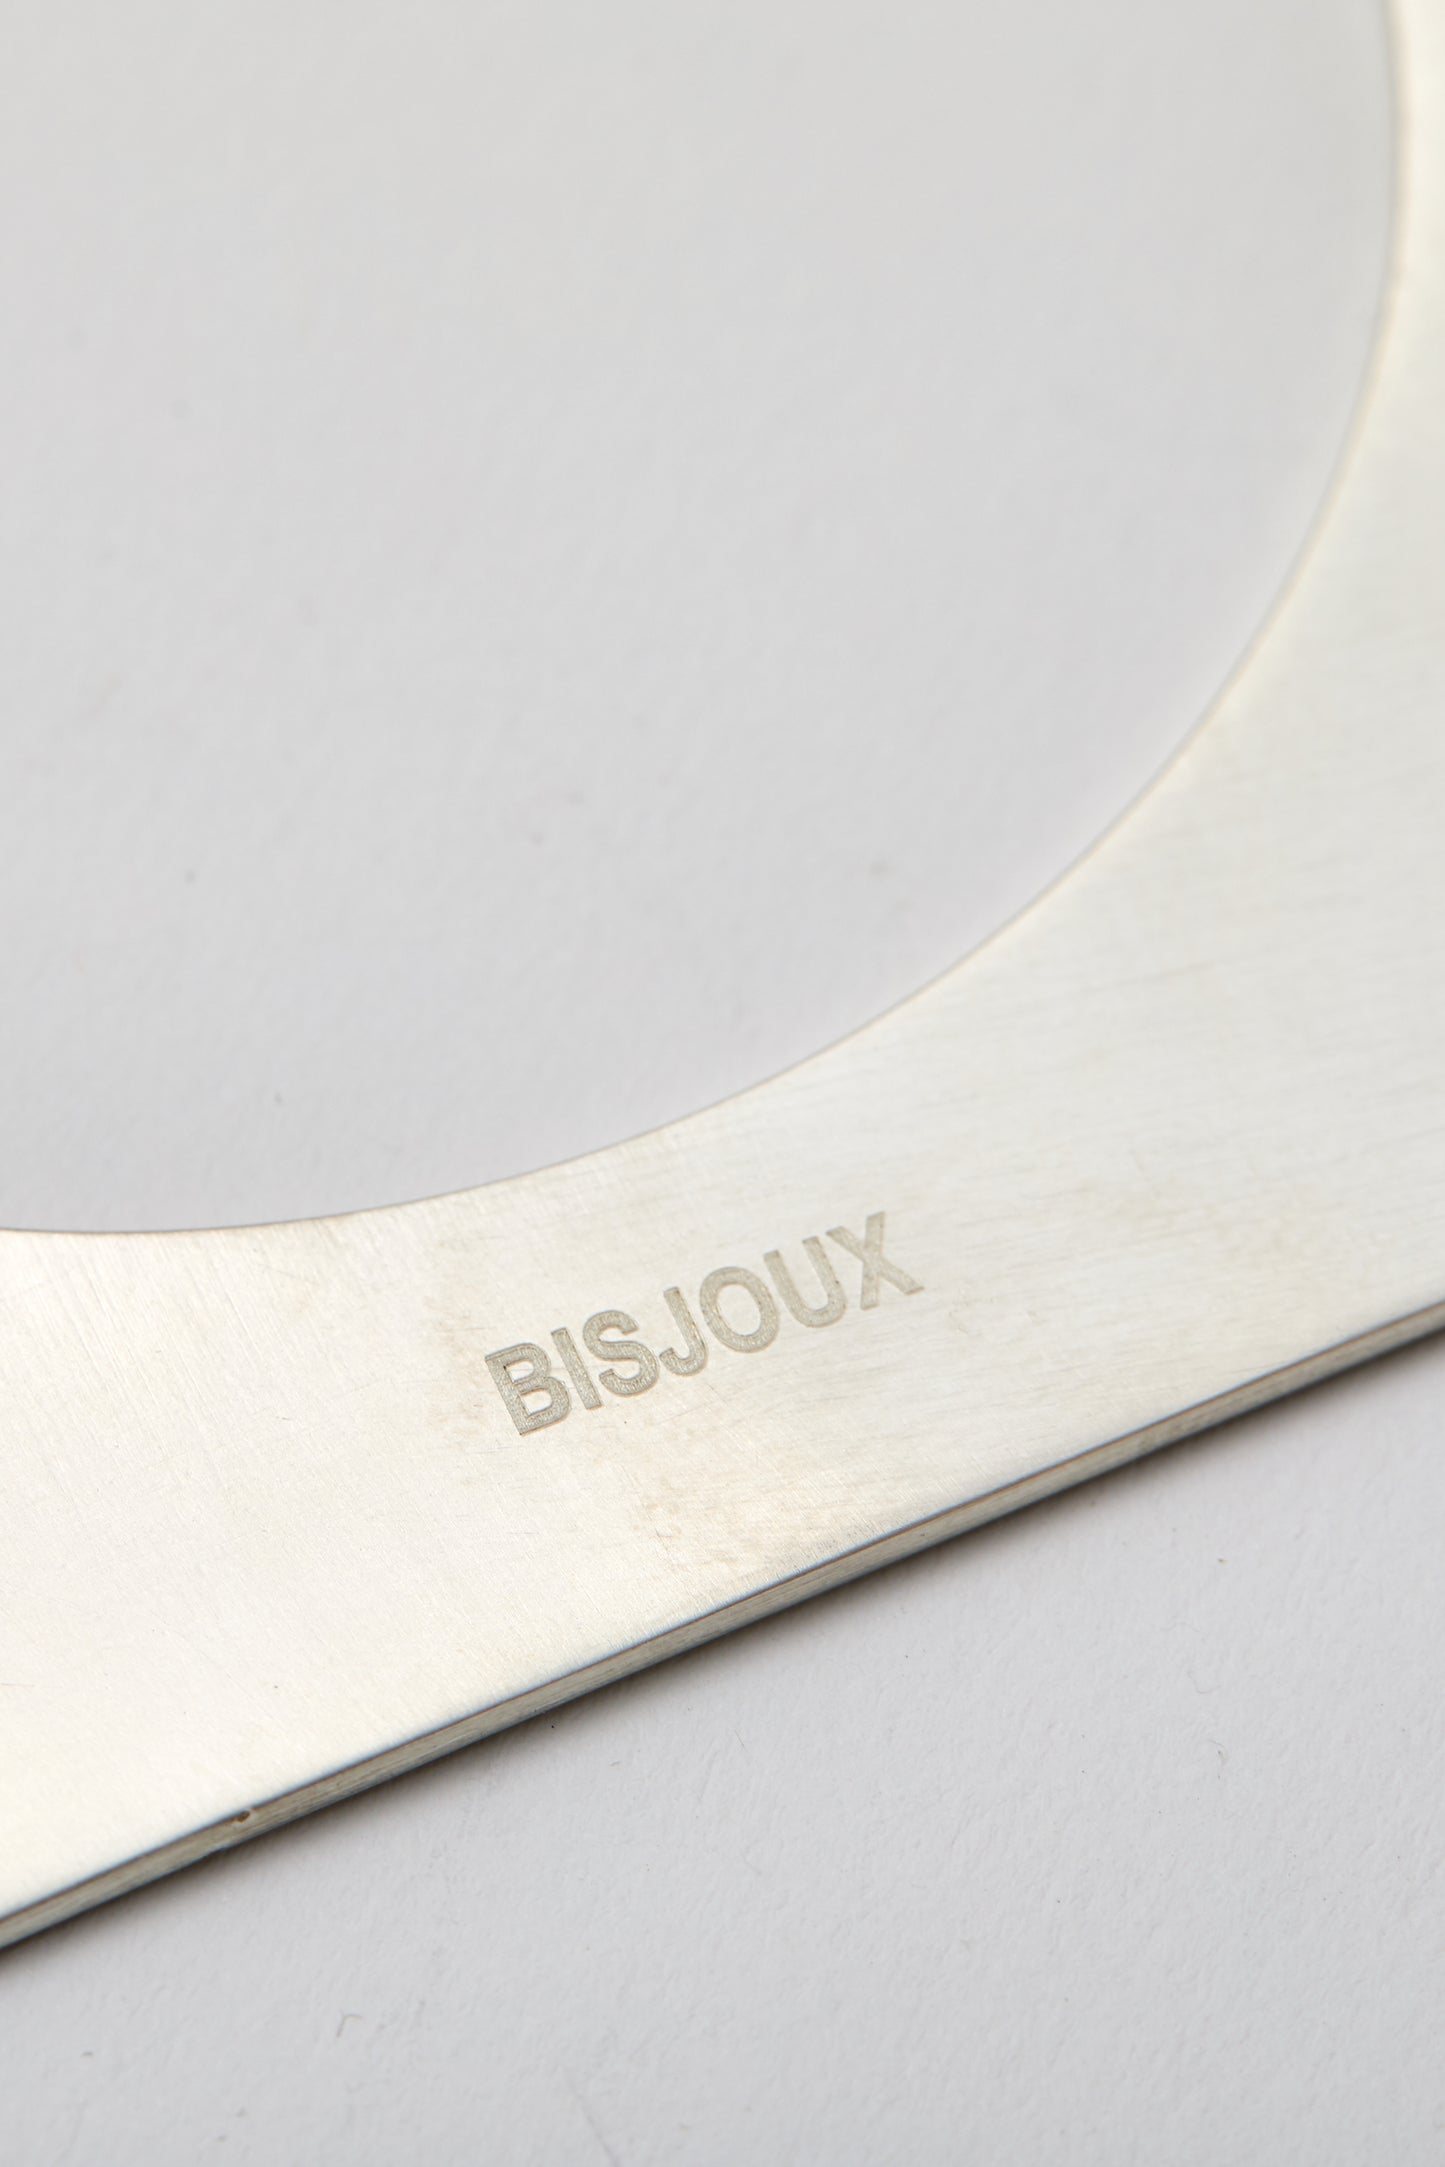 Bisjoux-Silver-Handcrafted-Disc-Flat-Bangle-Cuff-Bracelet-Square